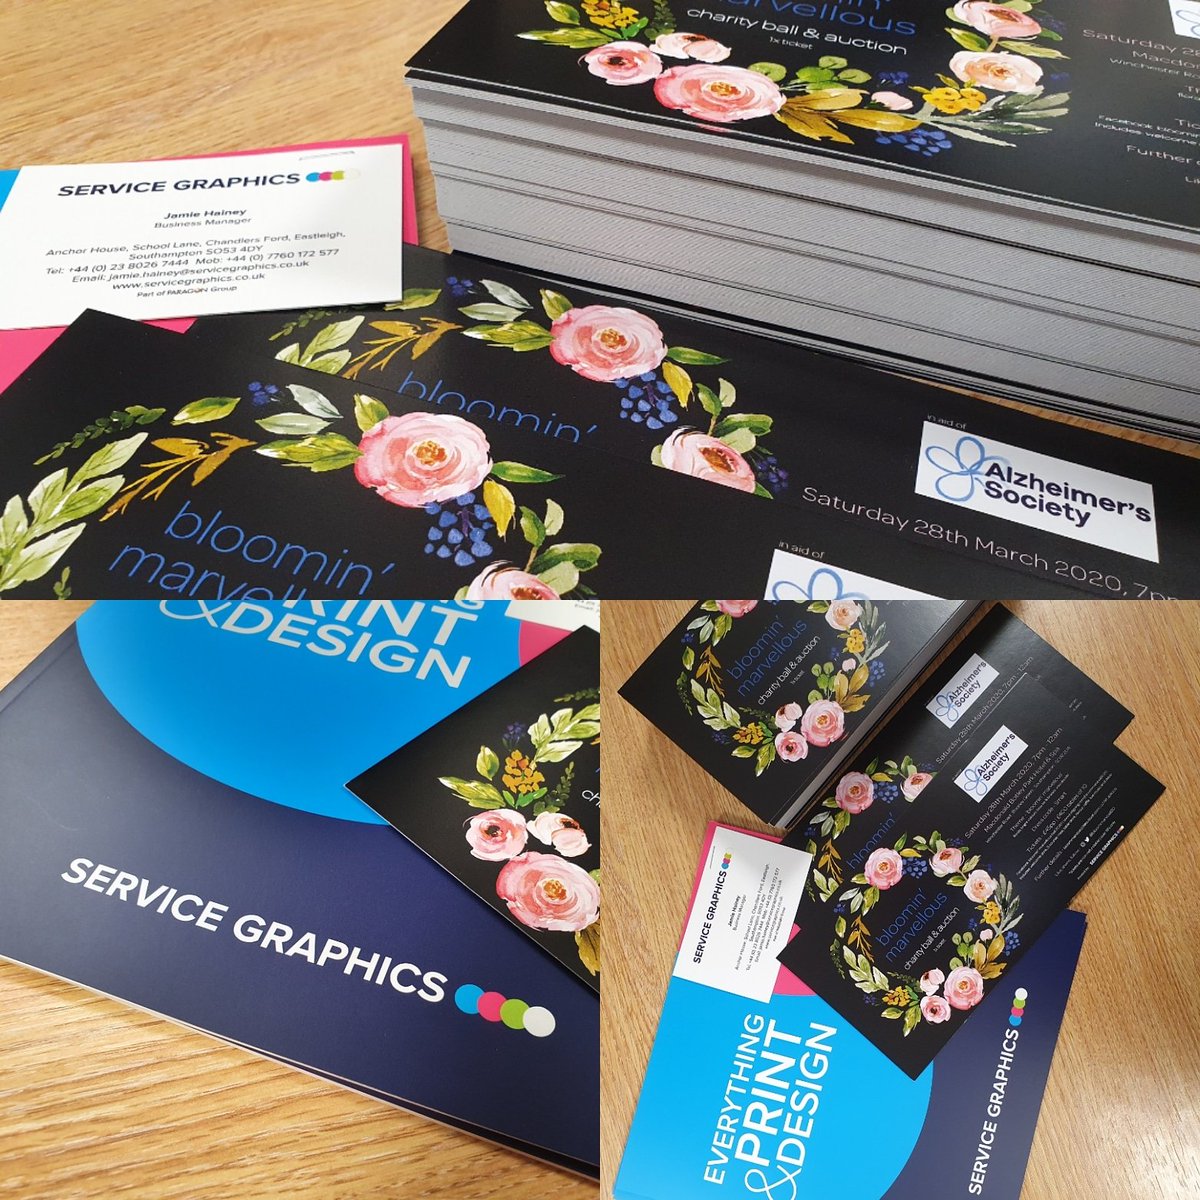 HOT OFF THE PRESS! The next batch of ball tickets has arrived! Have you bought yours yet? 🤩 A huge thank you to Stuart, Jamie and the whole team at #servicegraphics in Chandlers Ford for all your help! #charityball #fundraising @alzheimerssoc #hampshireevents #southampton